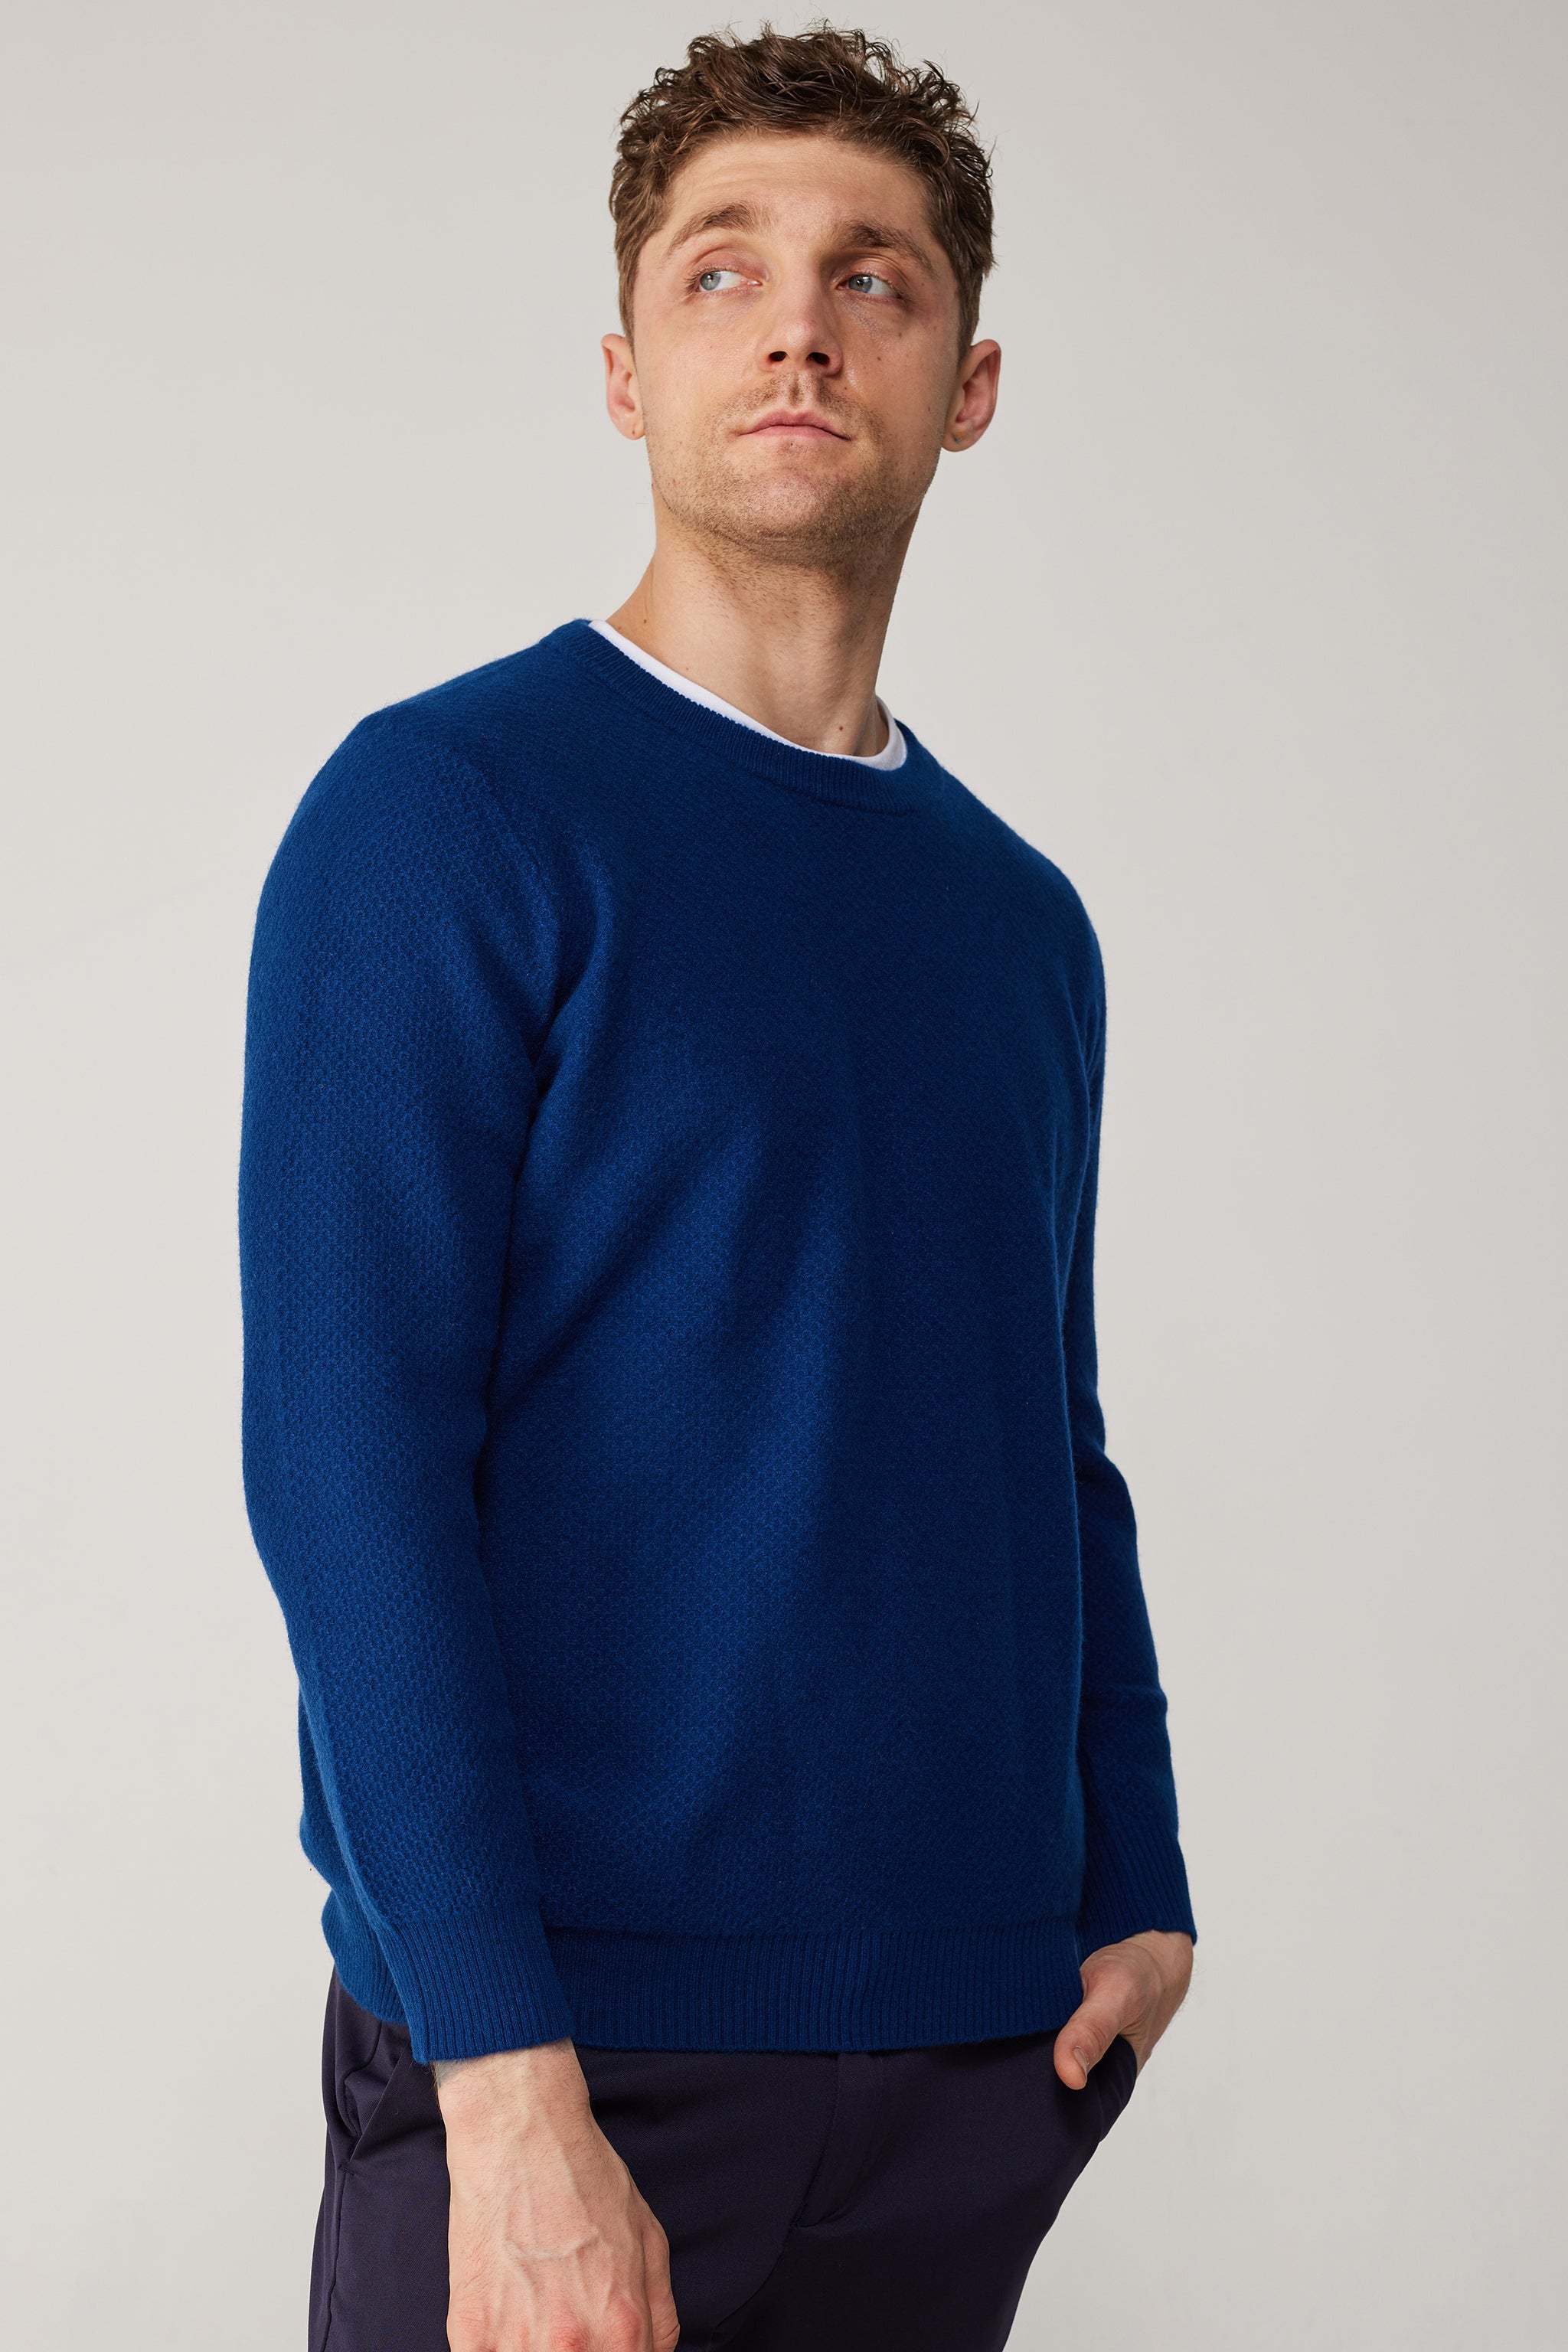 a blue sweater with a round neck and long sleeves